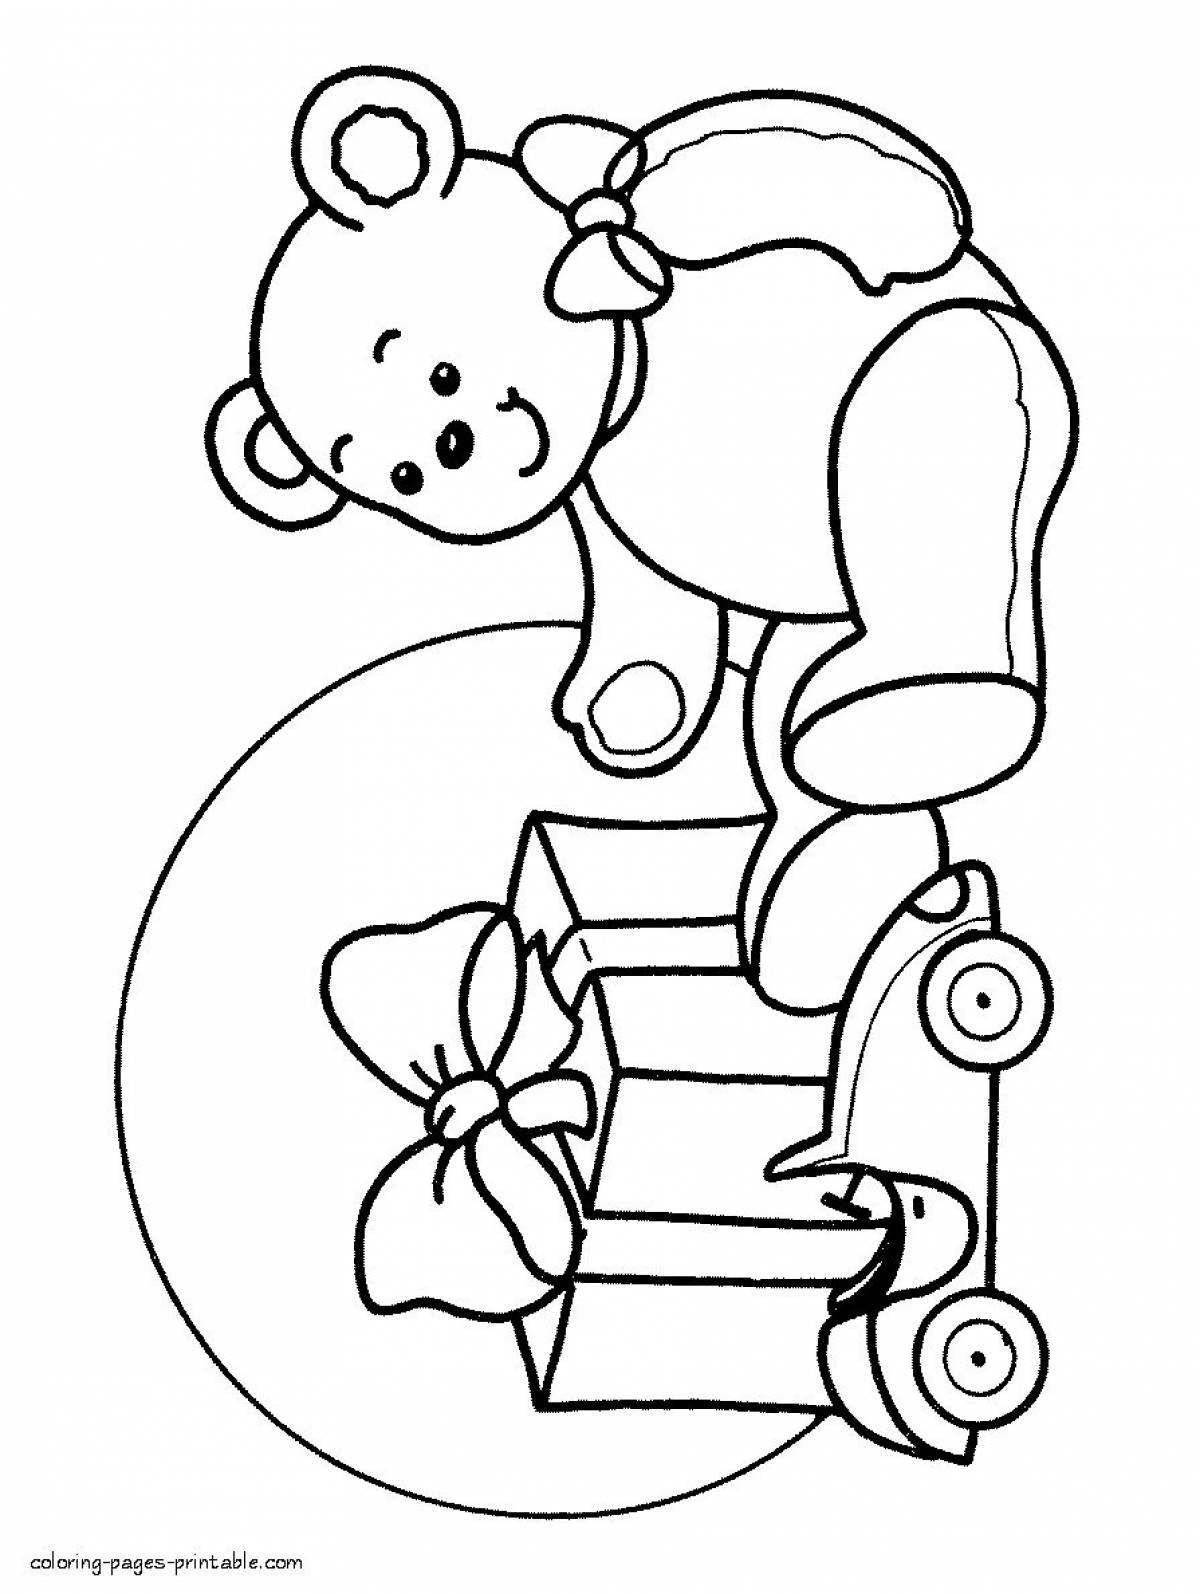 Luminous toy coloring page